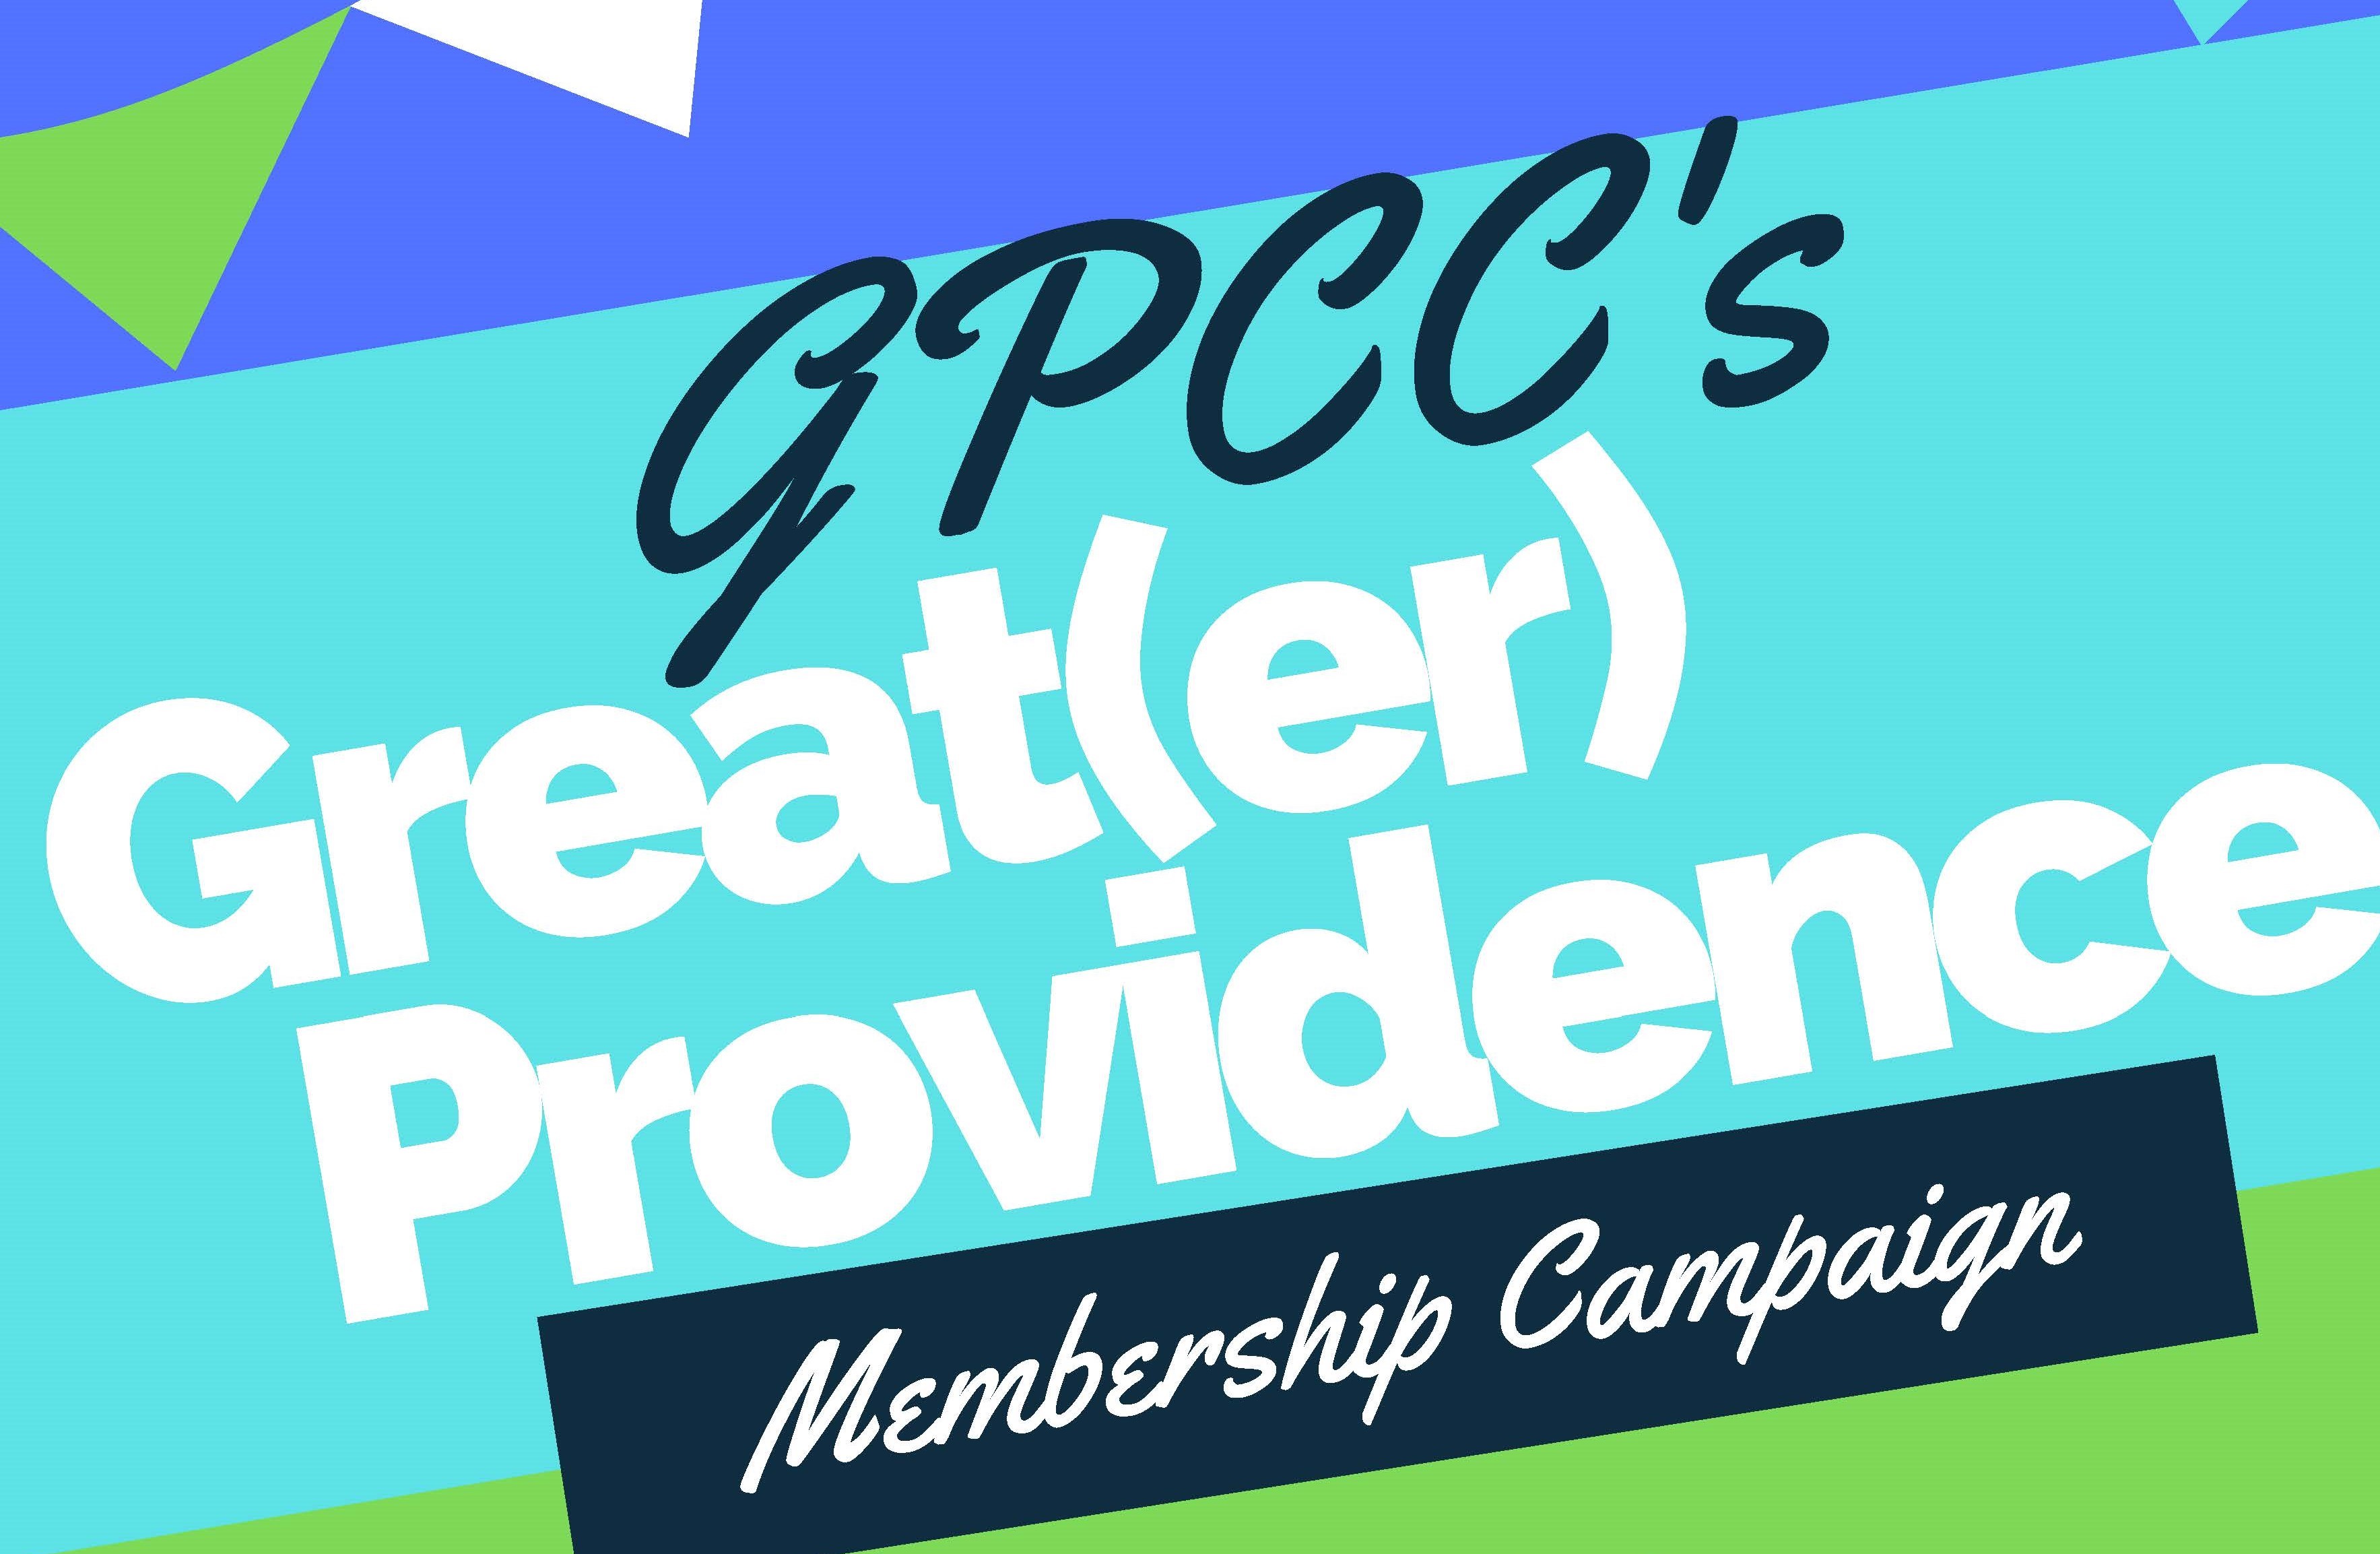 Chamber Launches “Great(er) Providence” August Membership Campaign